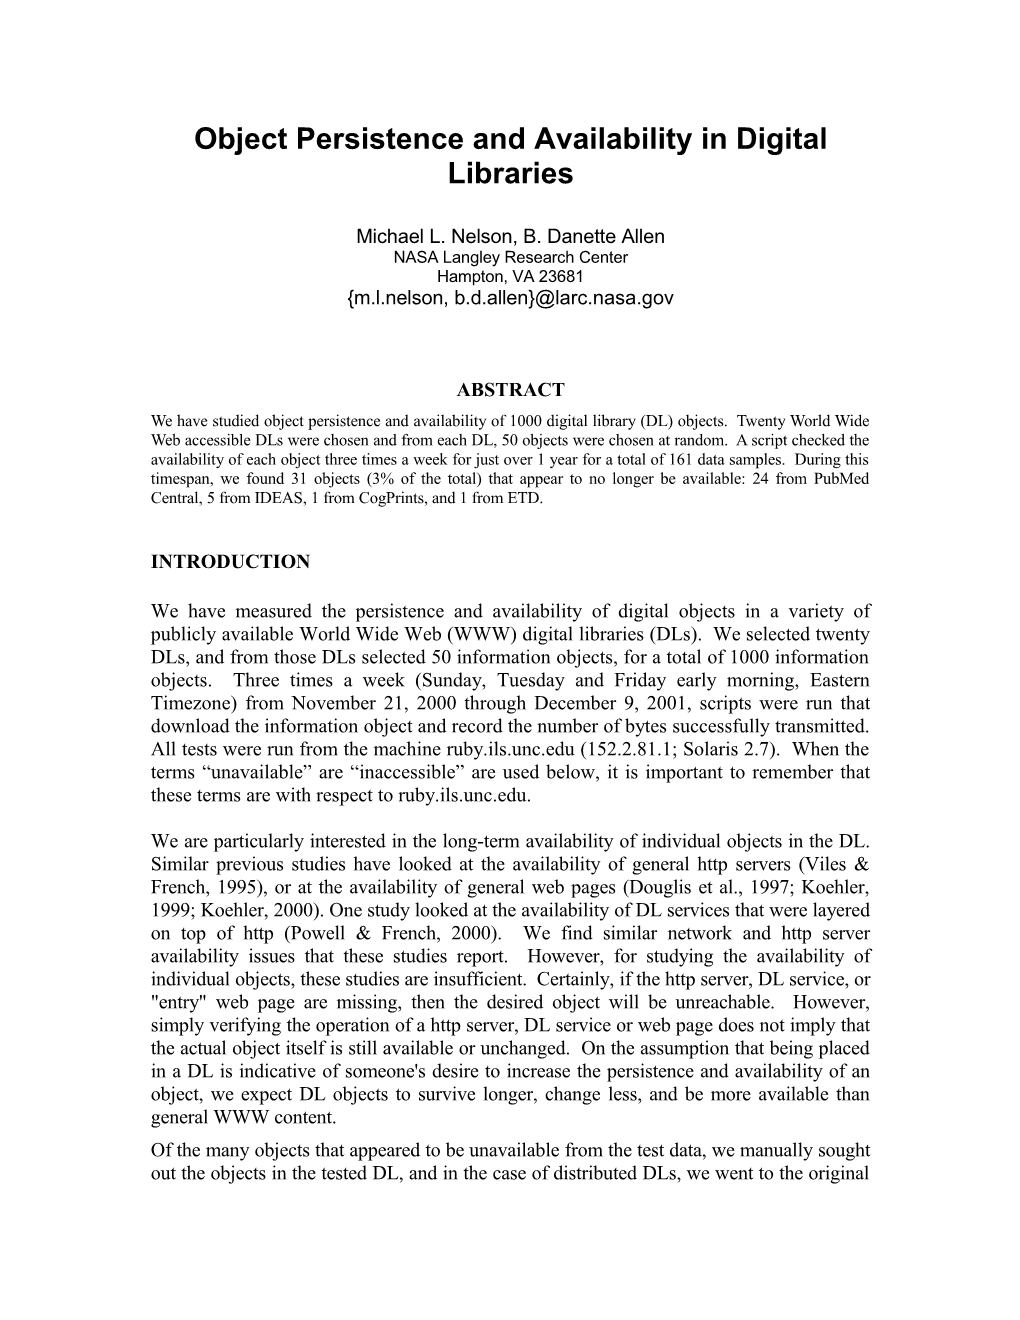 Object Persistence and Availability in Digital Libraries